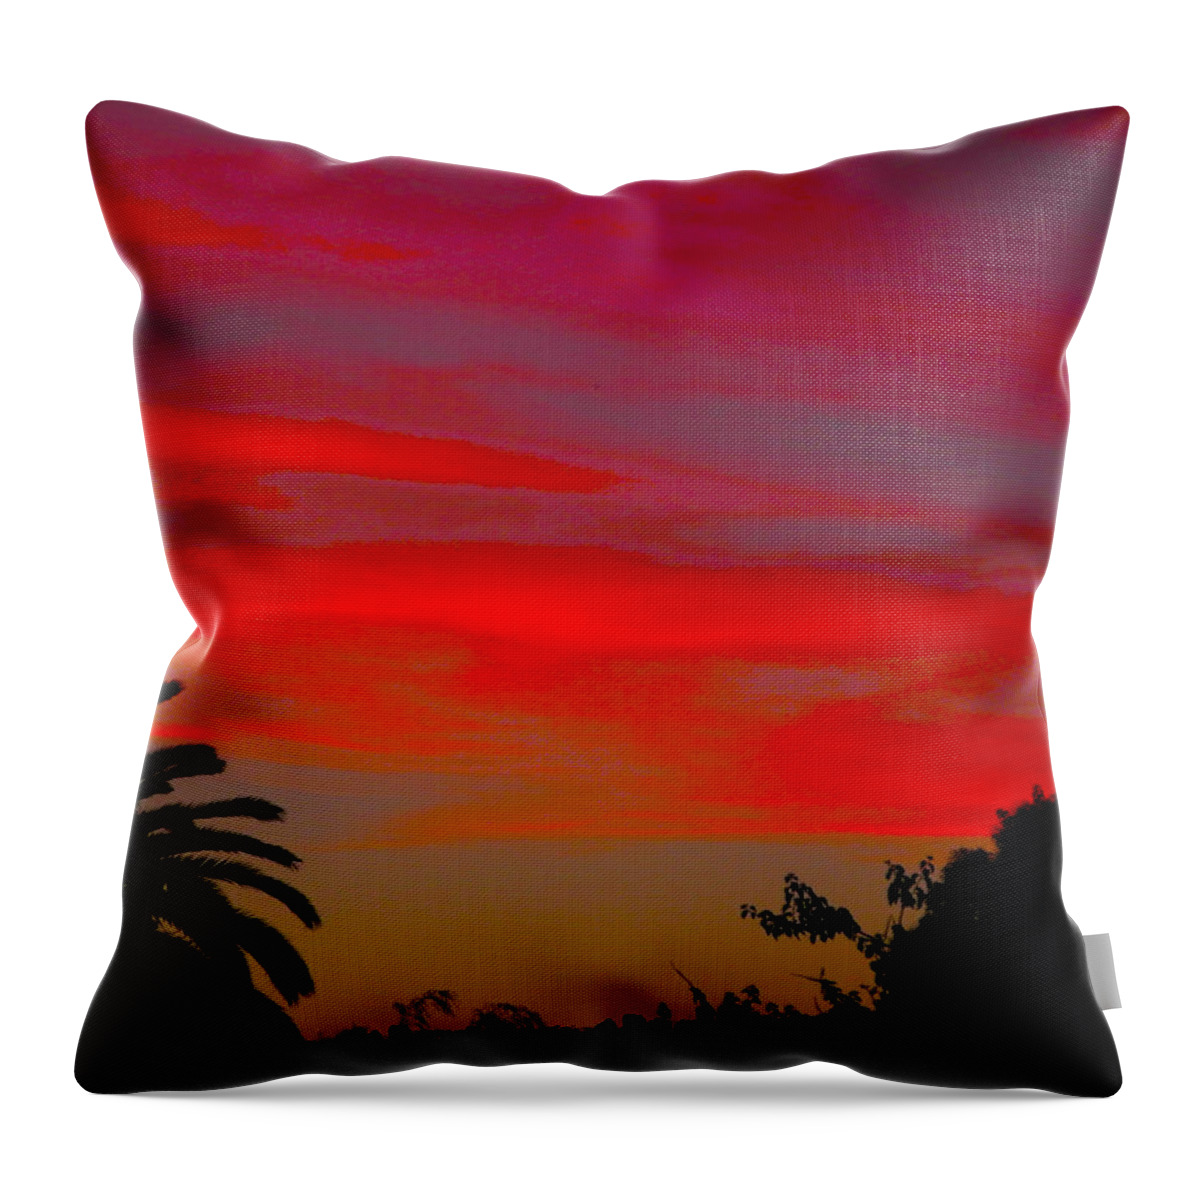 Sunset Throw Pillow featuring the photograph Red Clouds by Mark Blauhoefer